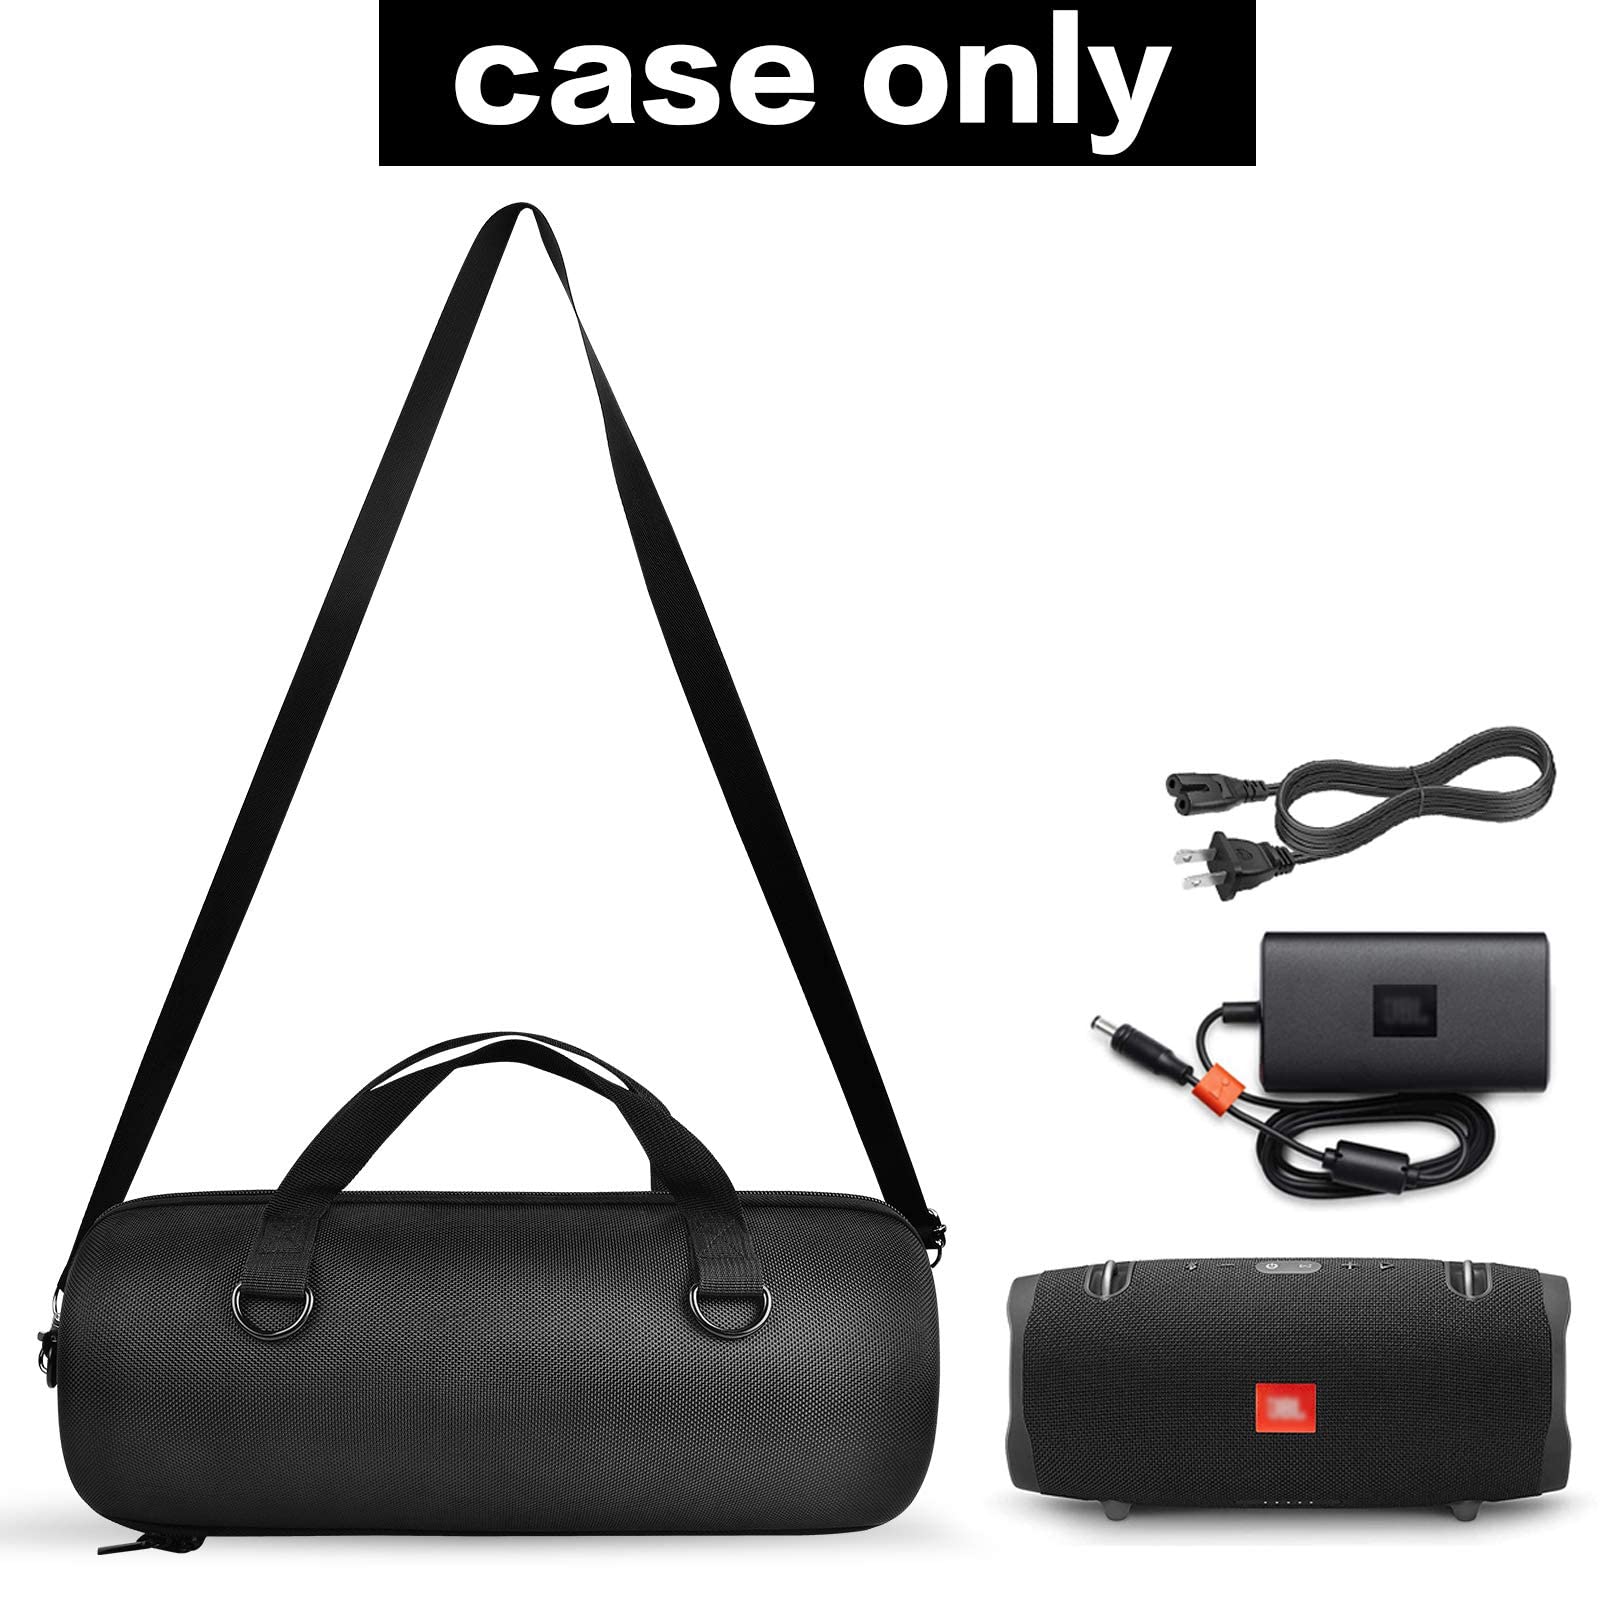 Hard Case for JBL Extreme/Lifestyle Xtreme 2/ Xtreme 3 Portable Bluetooth Speaker, Travel Carrying Storage Holder Bag Fit for Charger Adapter and Accessories